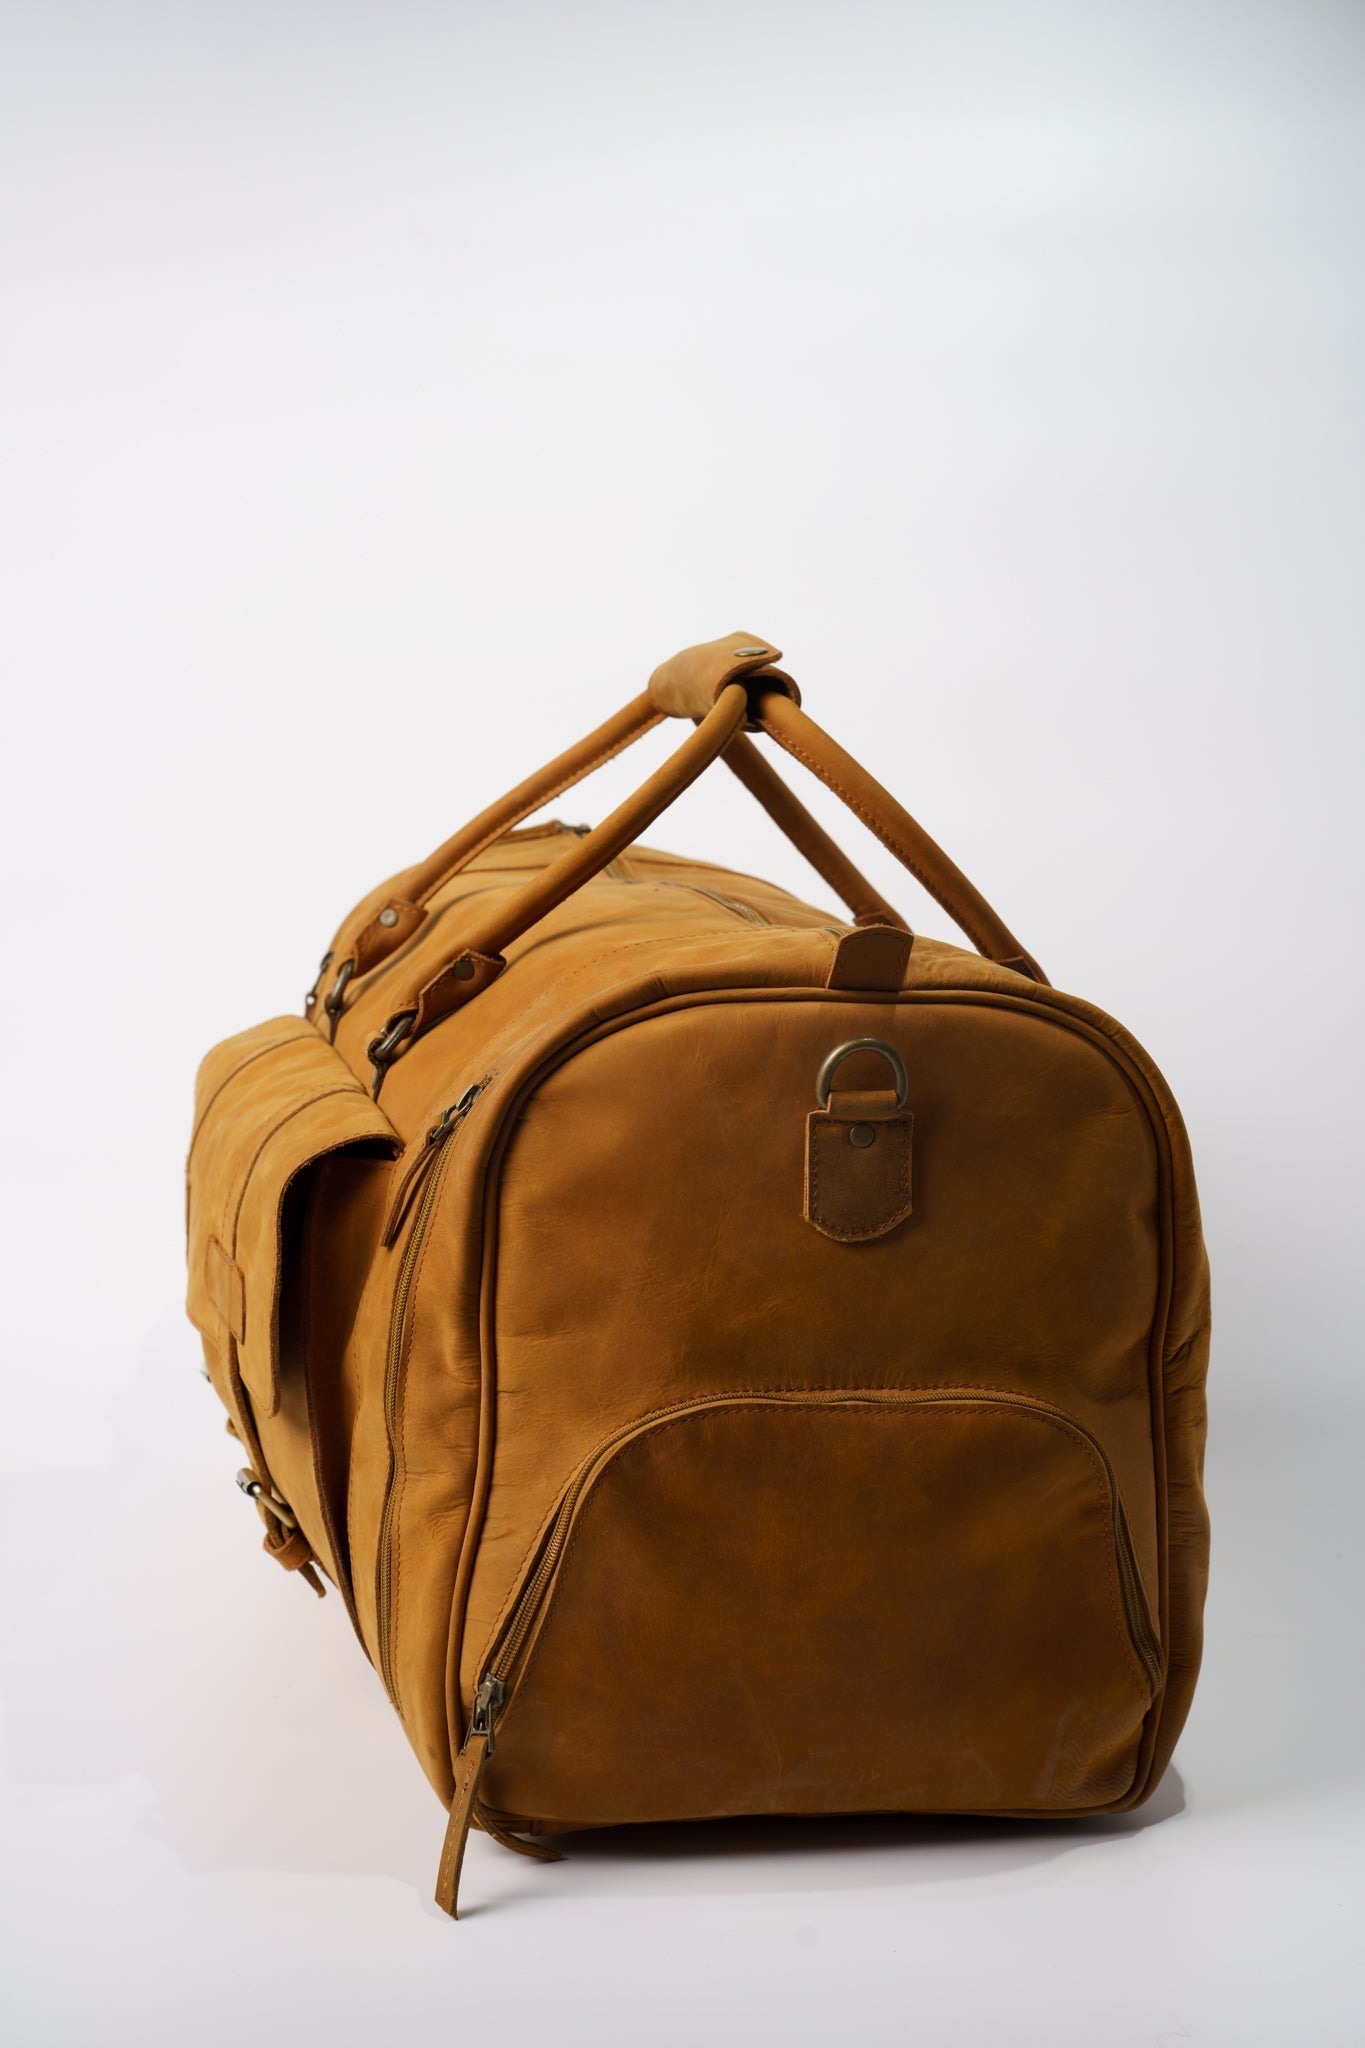 Side view of Chamra's Matte Leather Duffel bag with shoe compartment. This shot showcases the compartment for the shoes on the side of the bag.